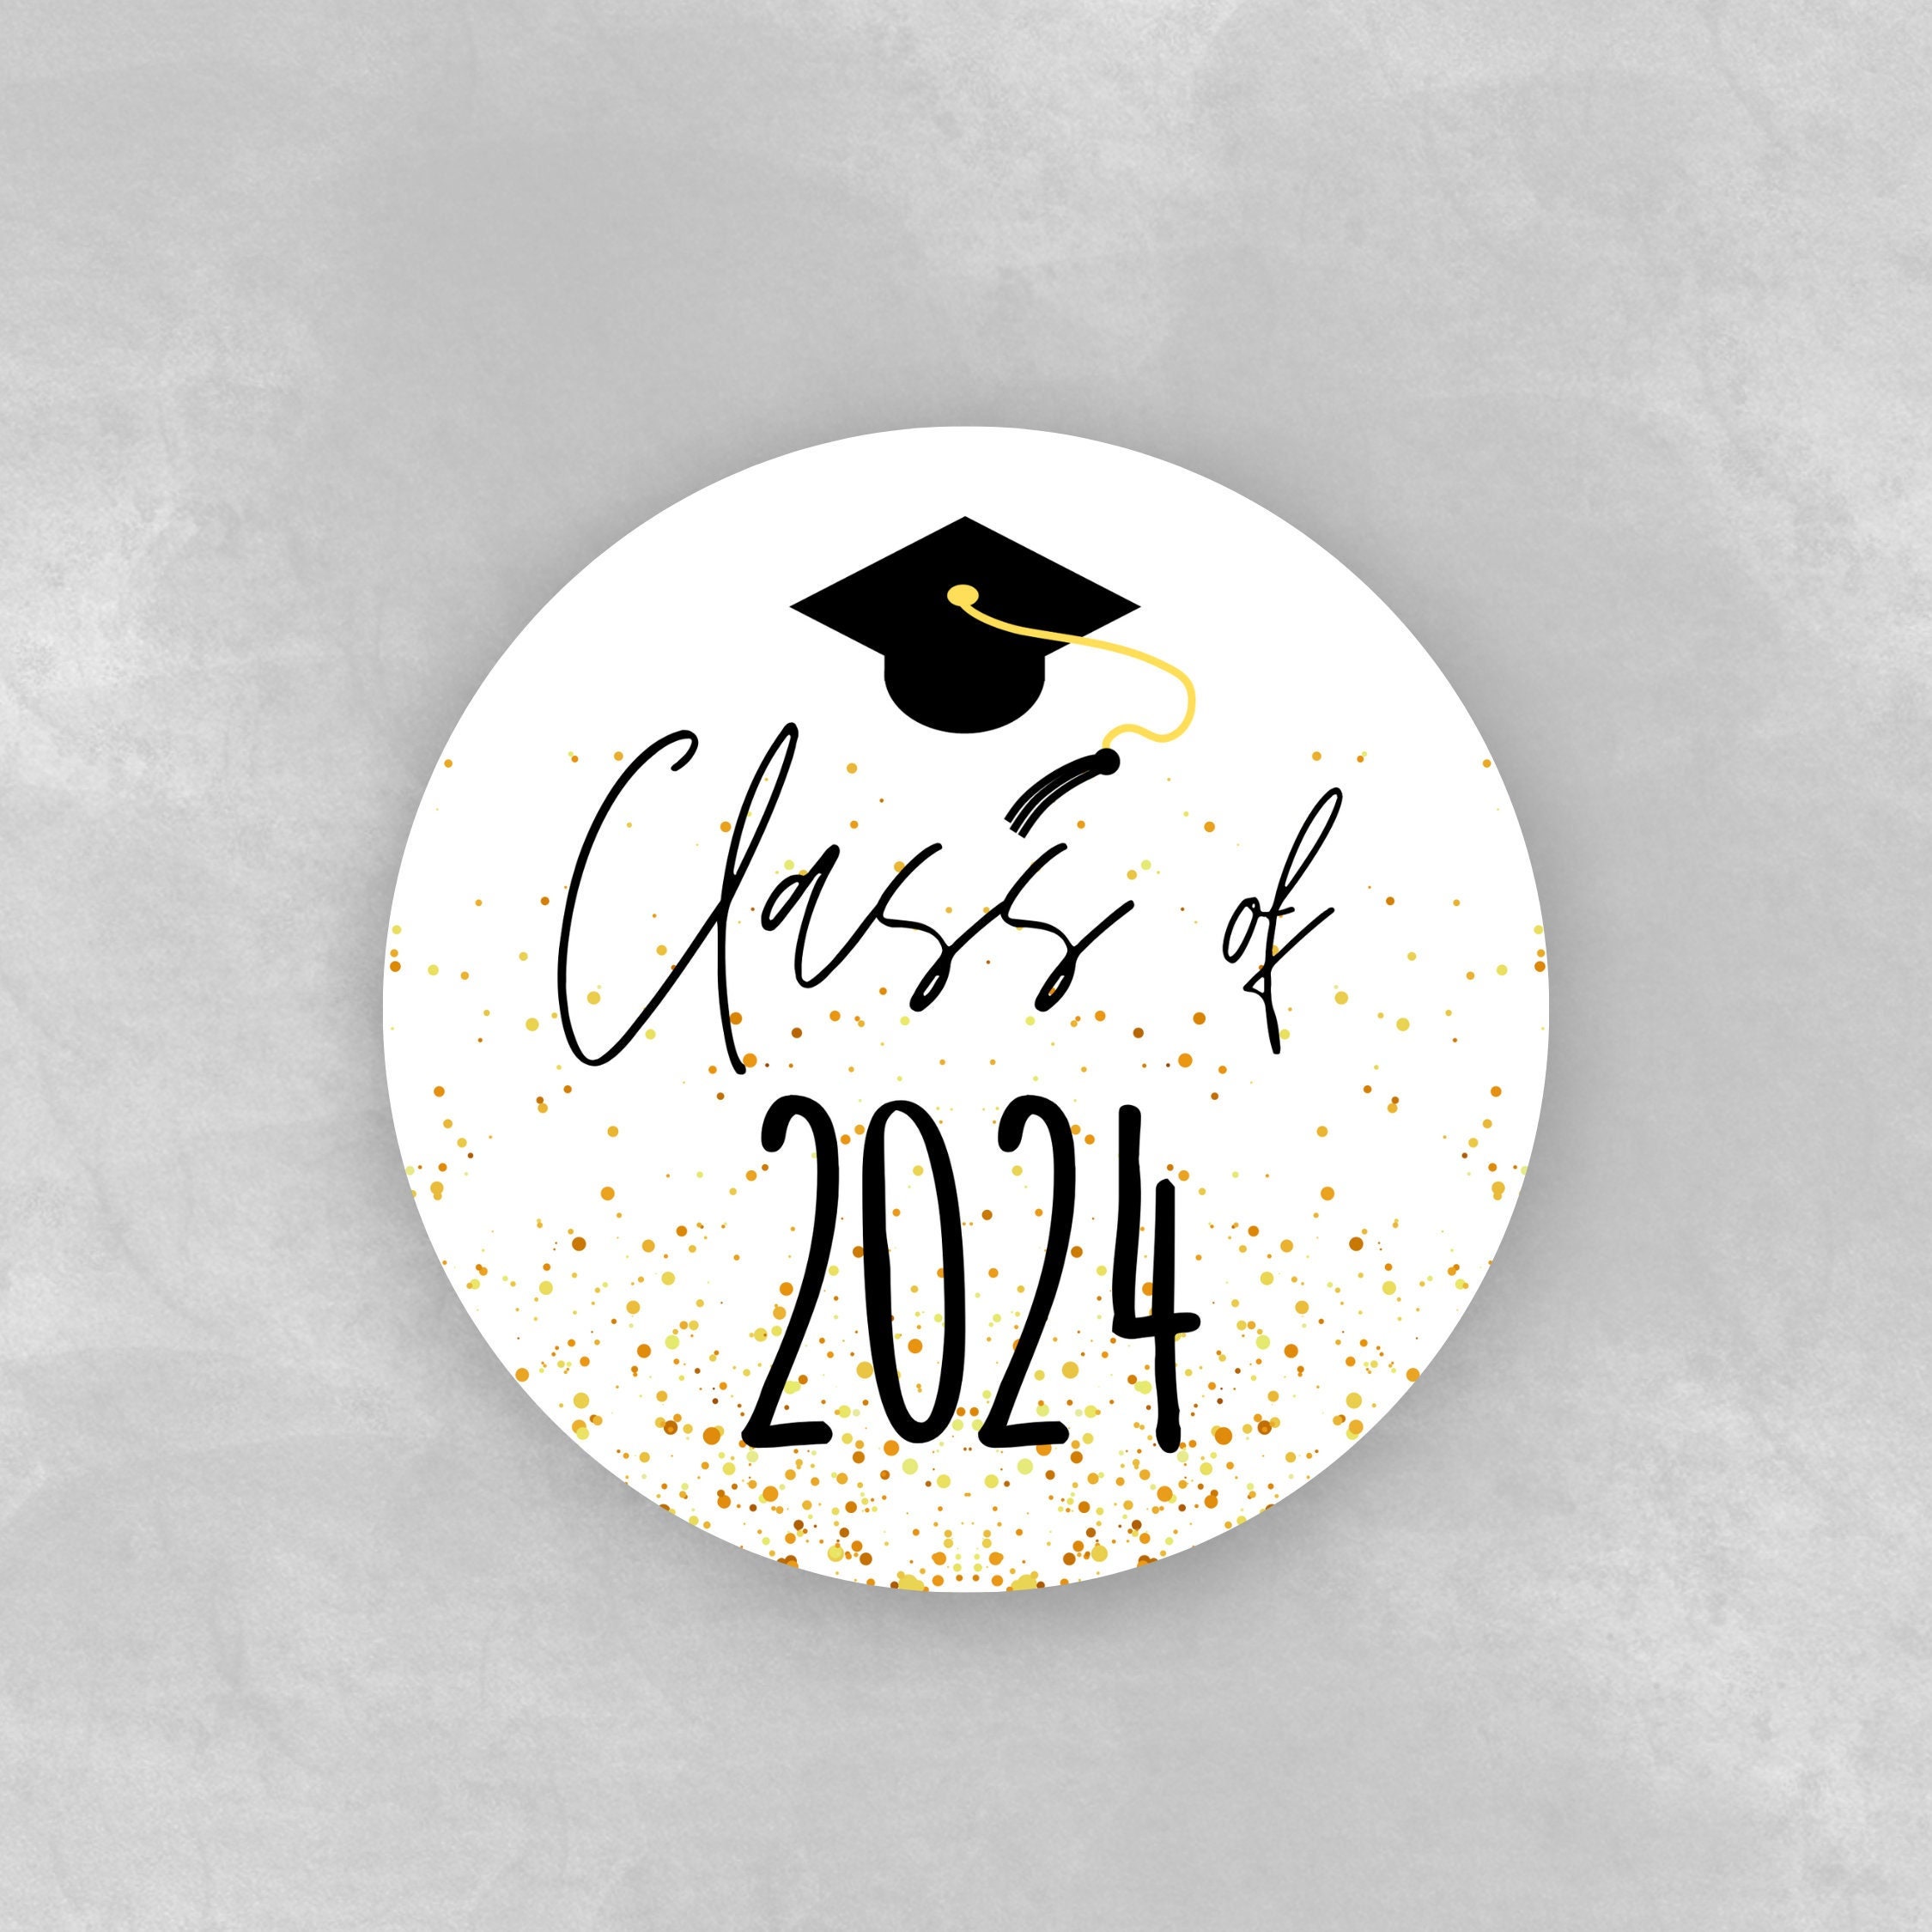 Graduation Class of 2023/2024 Personalized Stickers for Envelopes